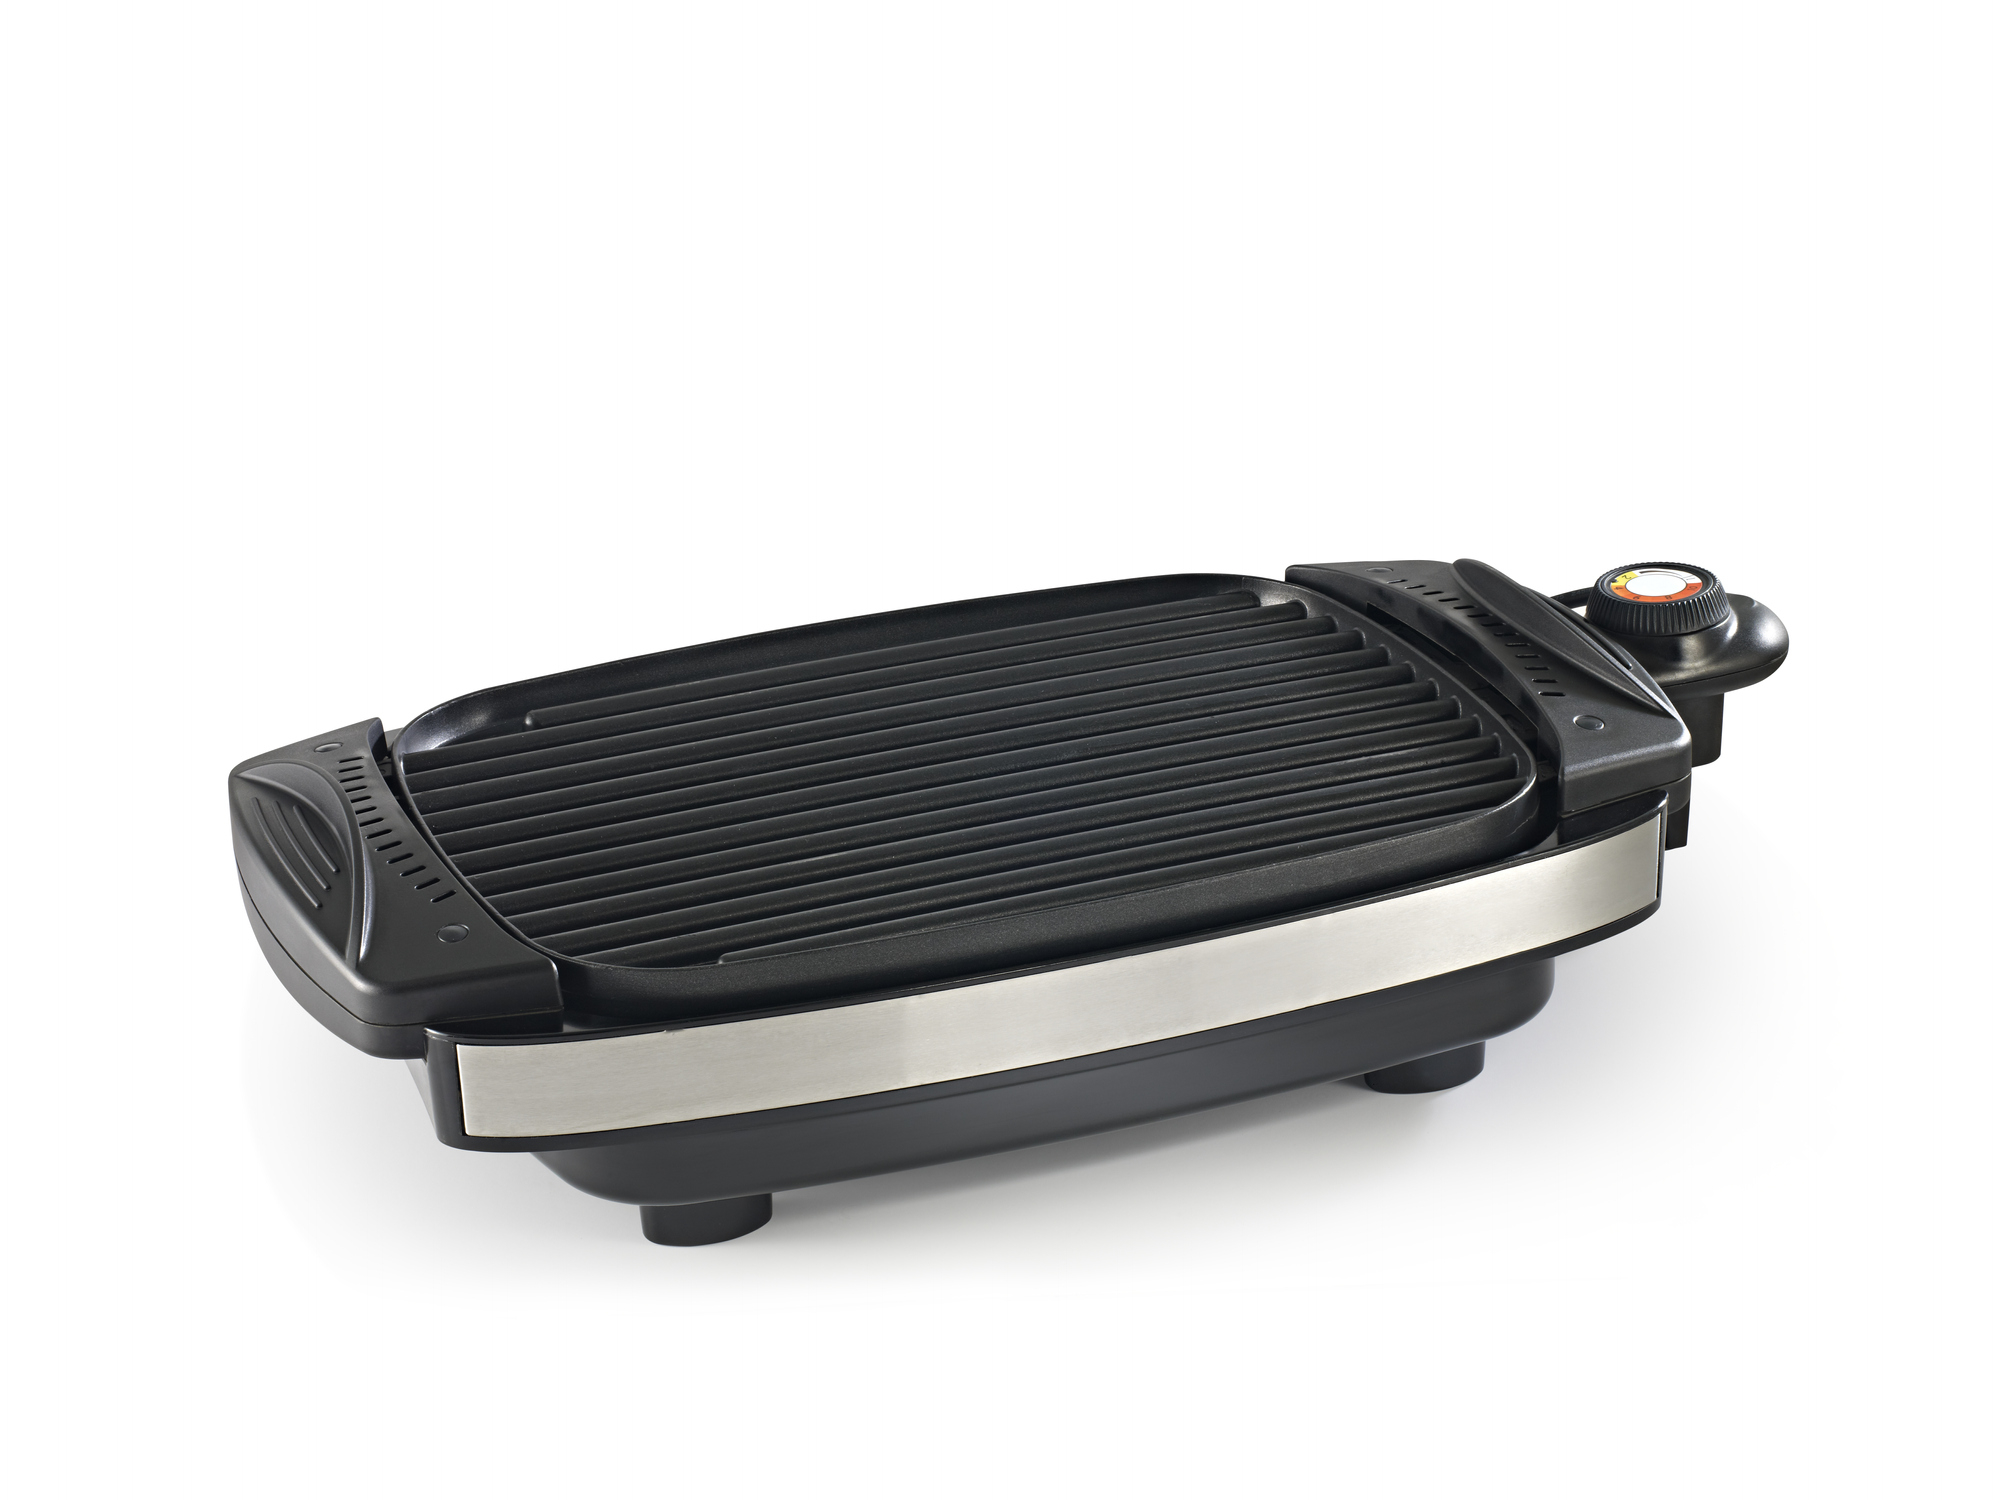 a George Foreman grill